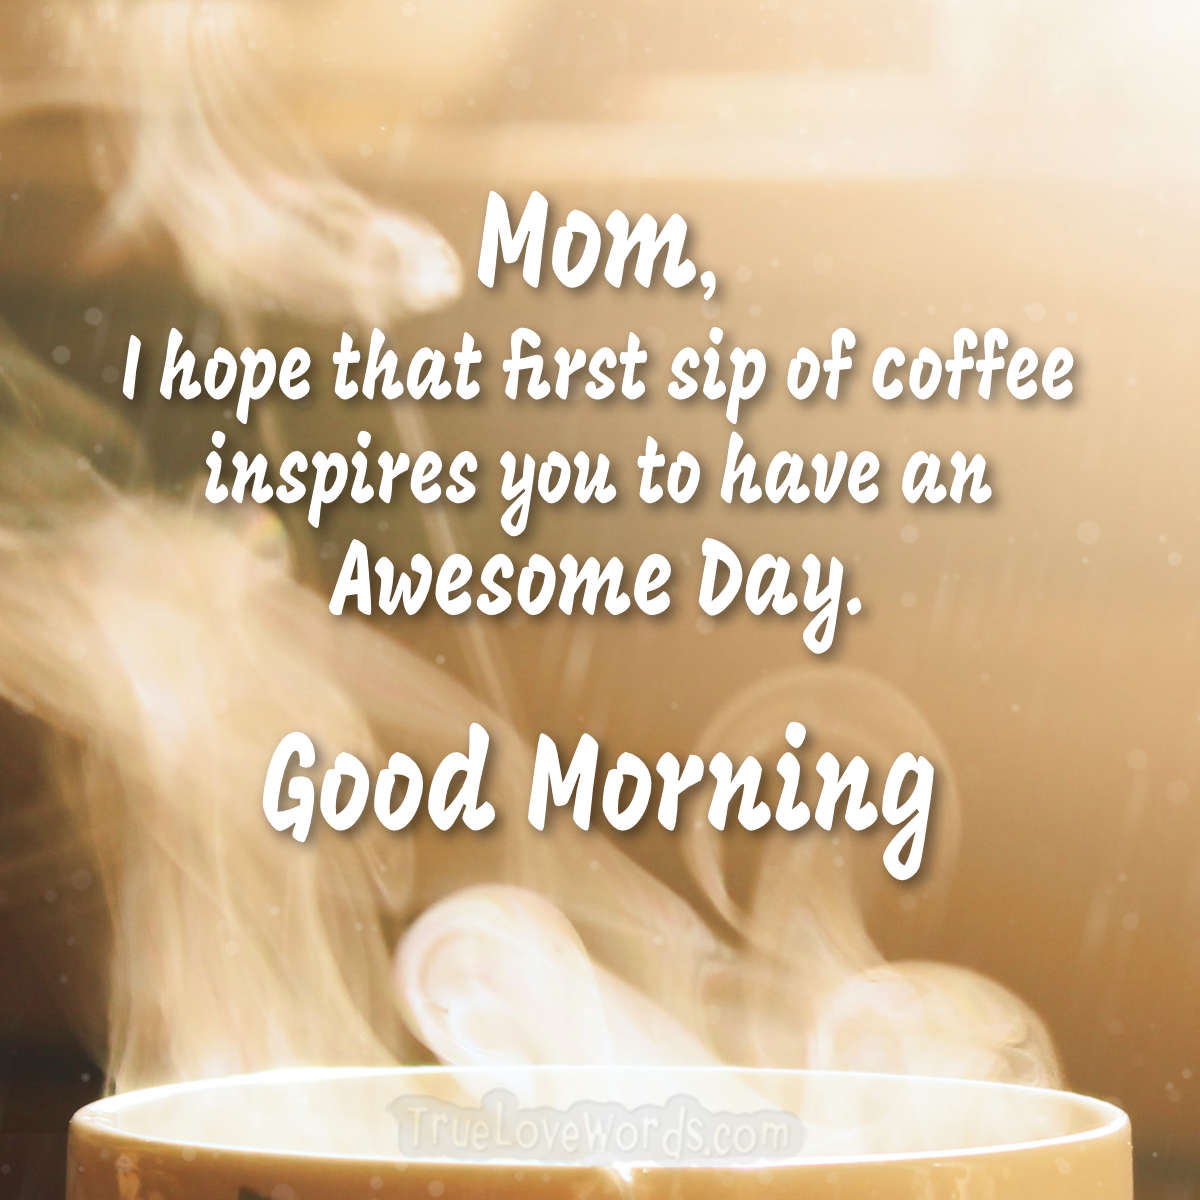 60 Sweet Good Morning Messages for Mom » True Love Words